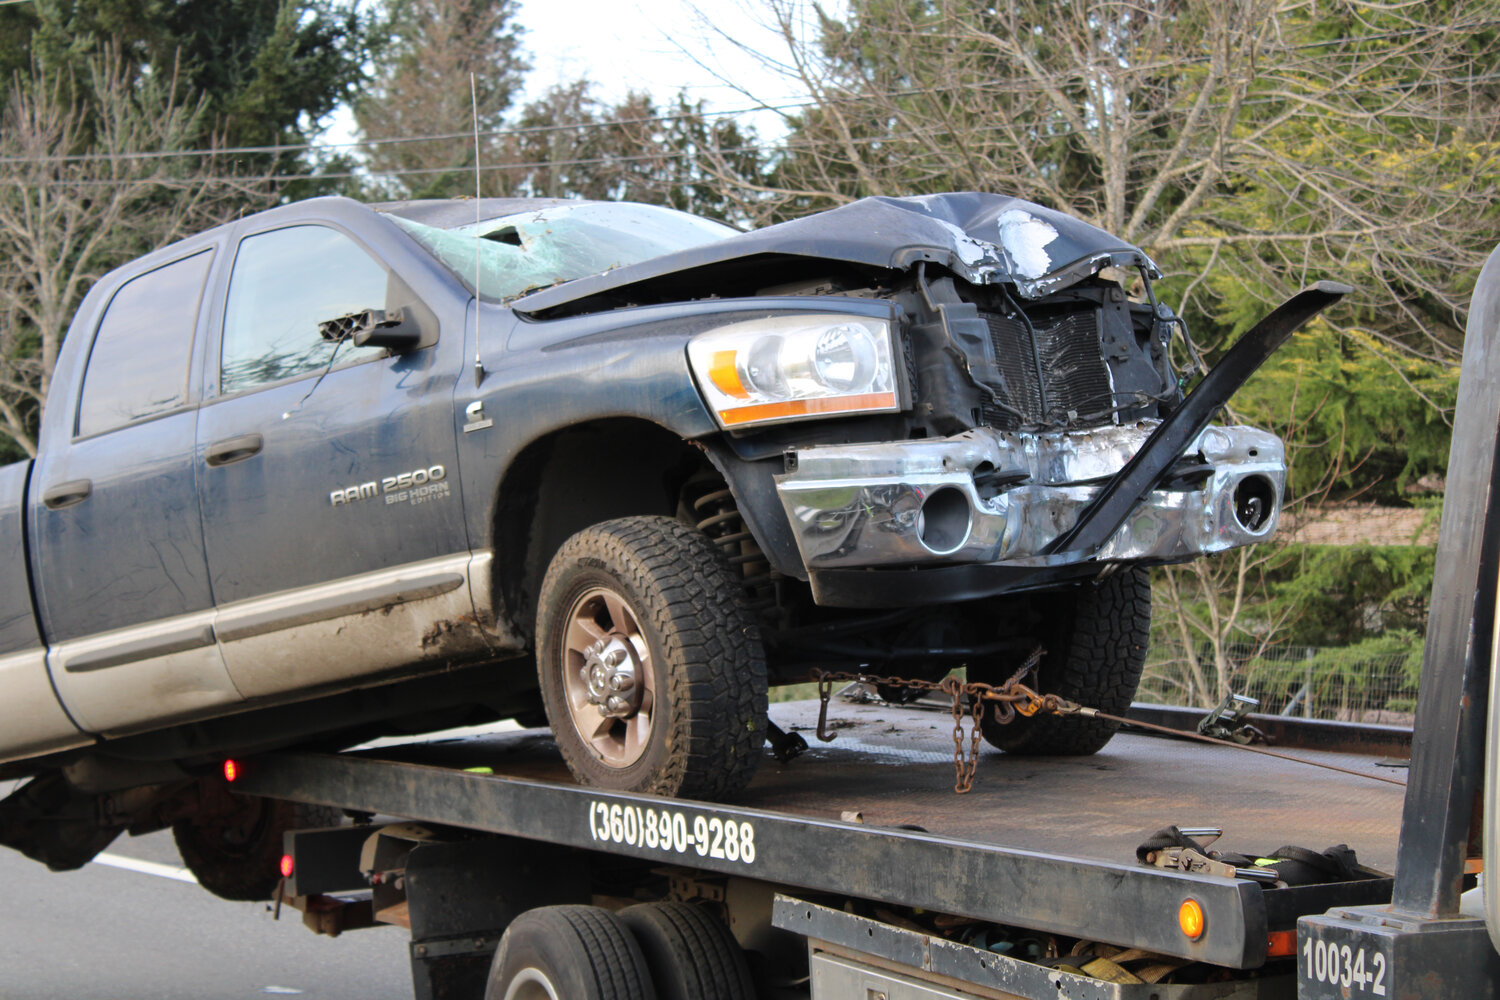 The Dodge Ram truck, loaded up on a tow truck, suffered significant damage to the front exterior on Jan. 30.